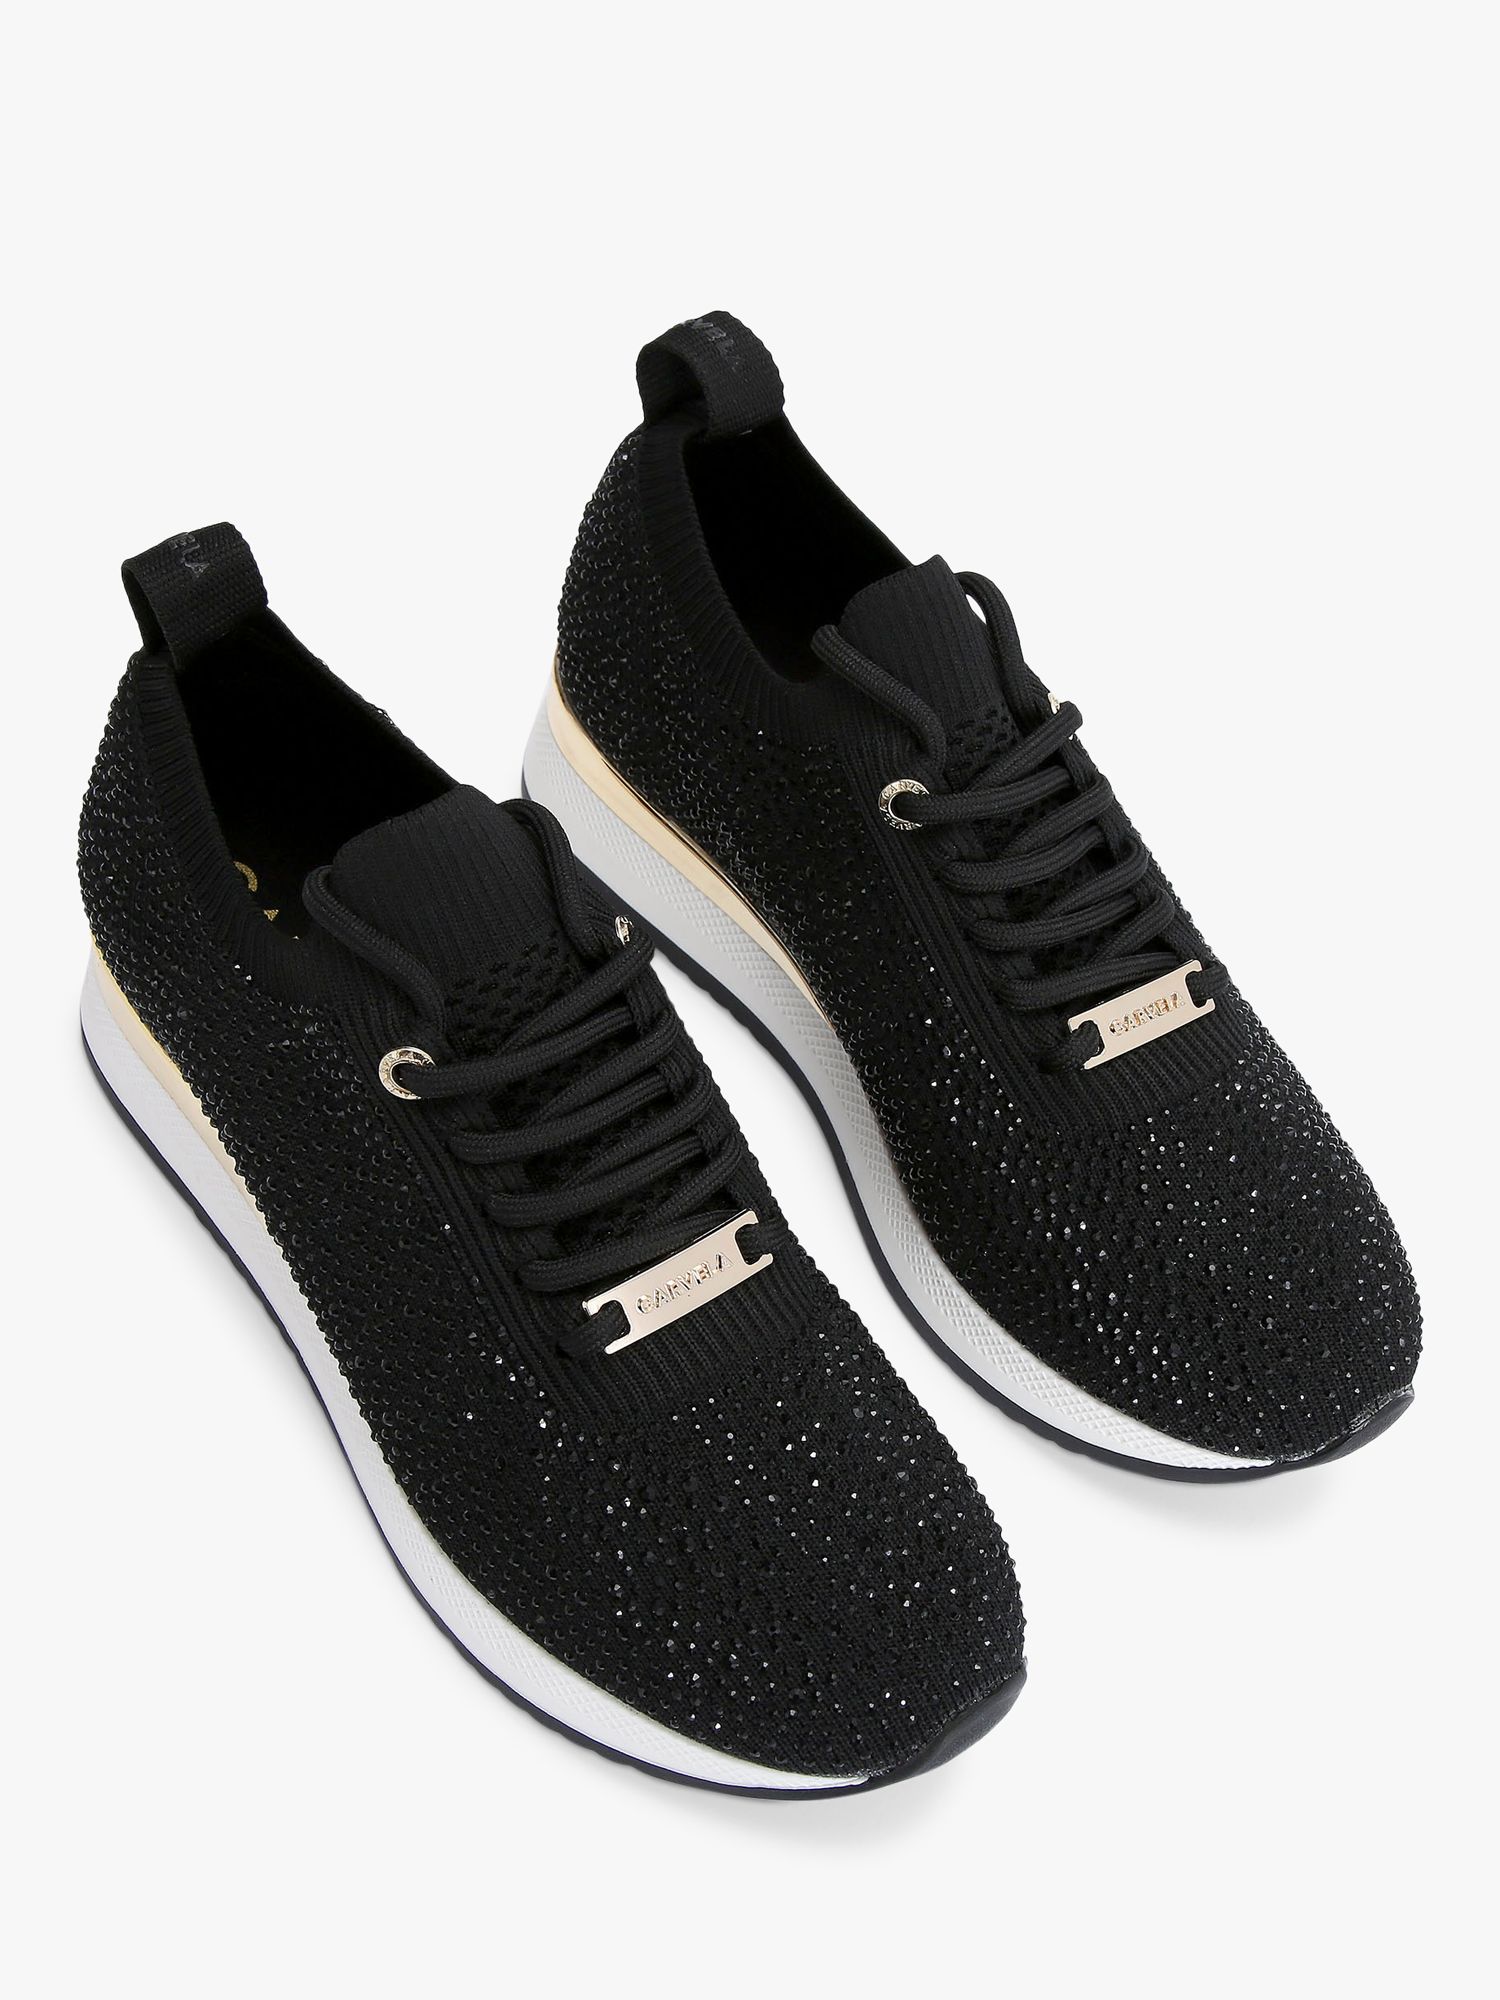 Buy Carvela Janeiro Jewel Lace Up Trainers Online at johnlewis.com